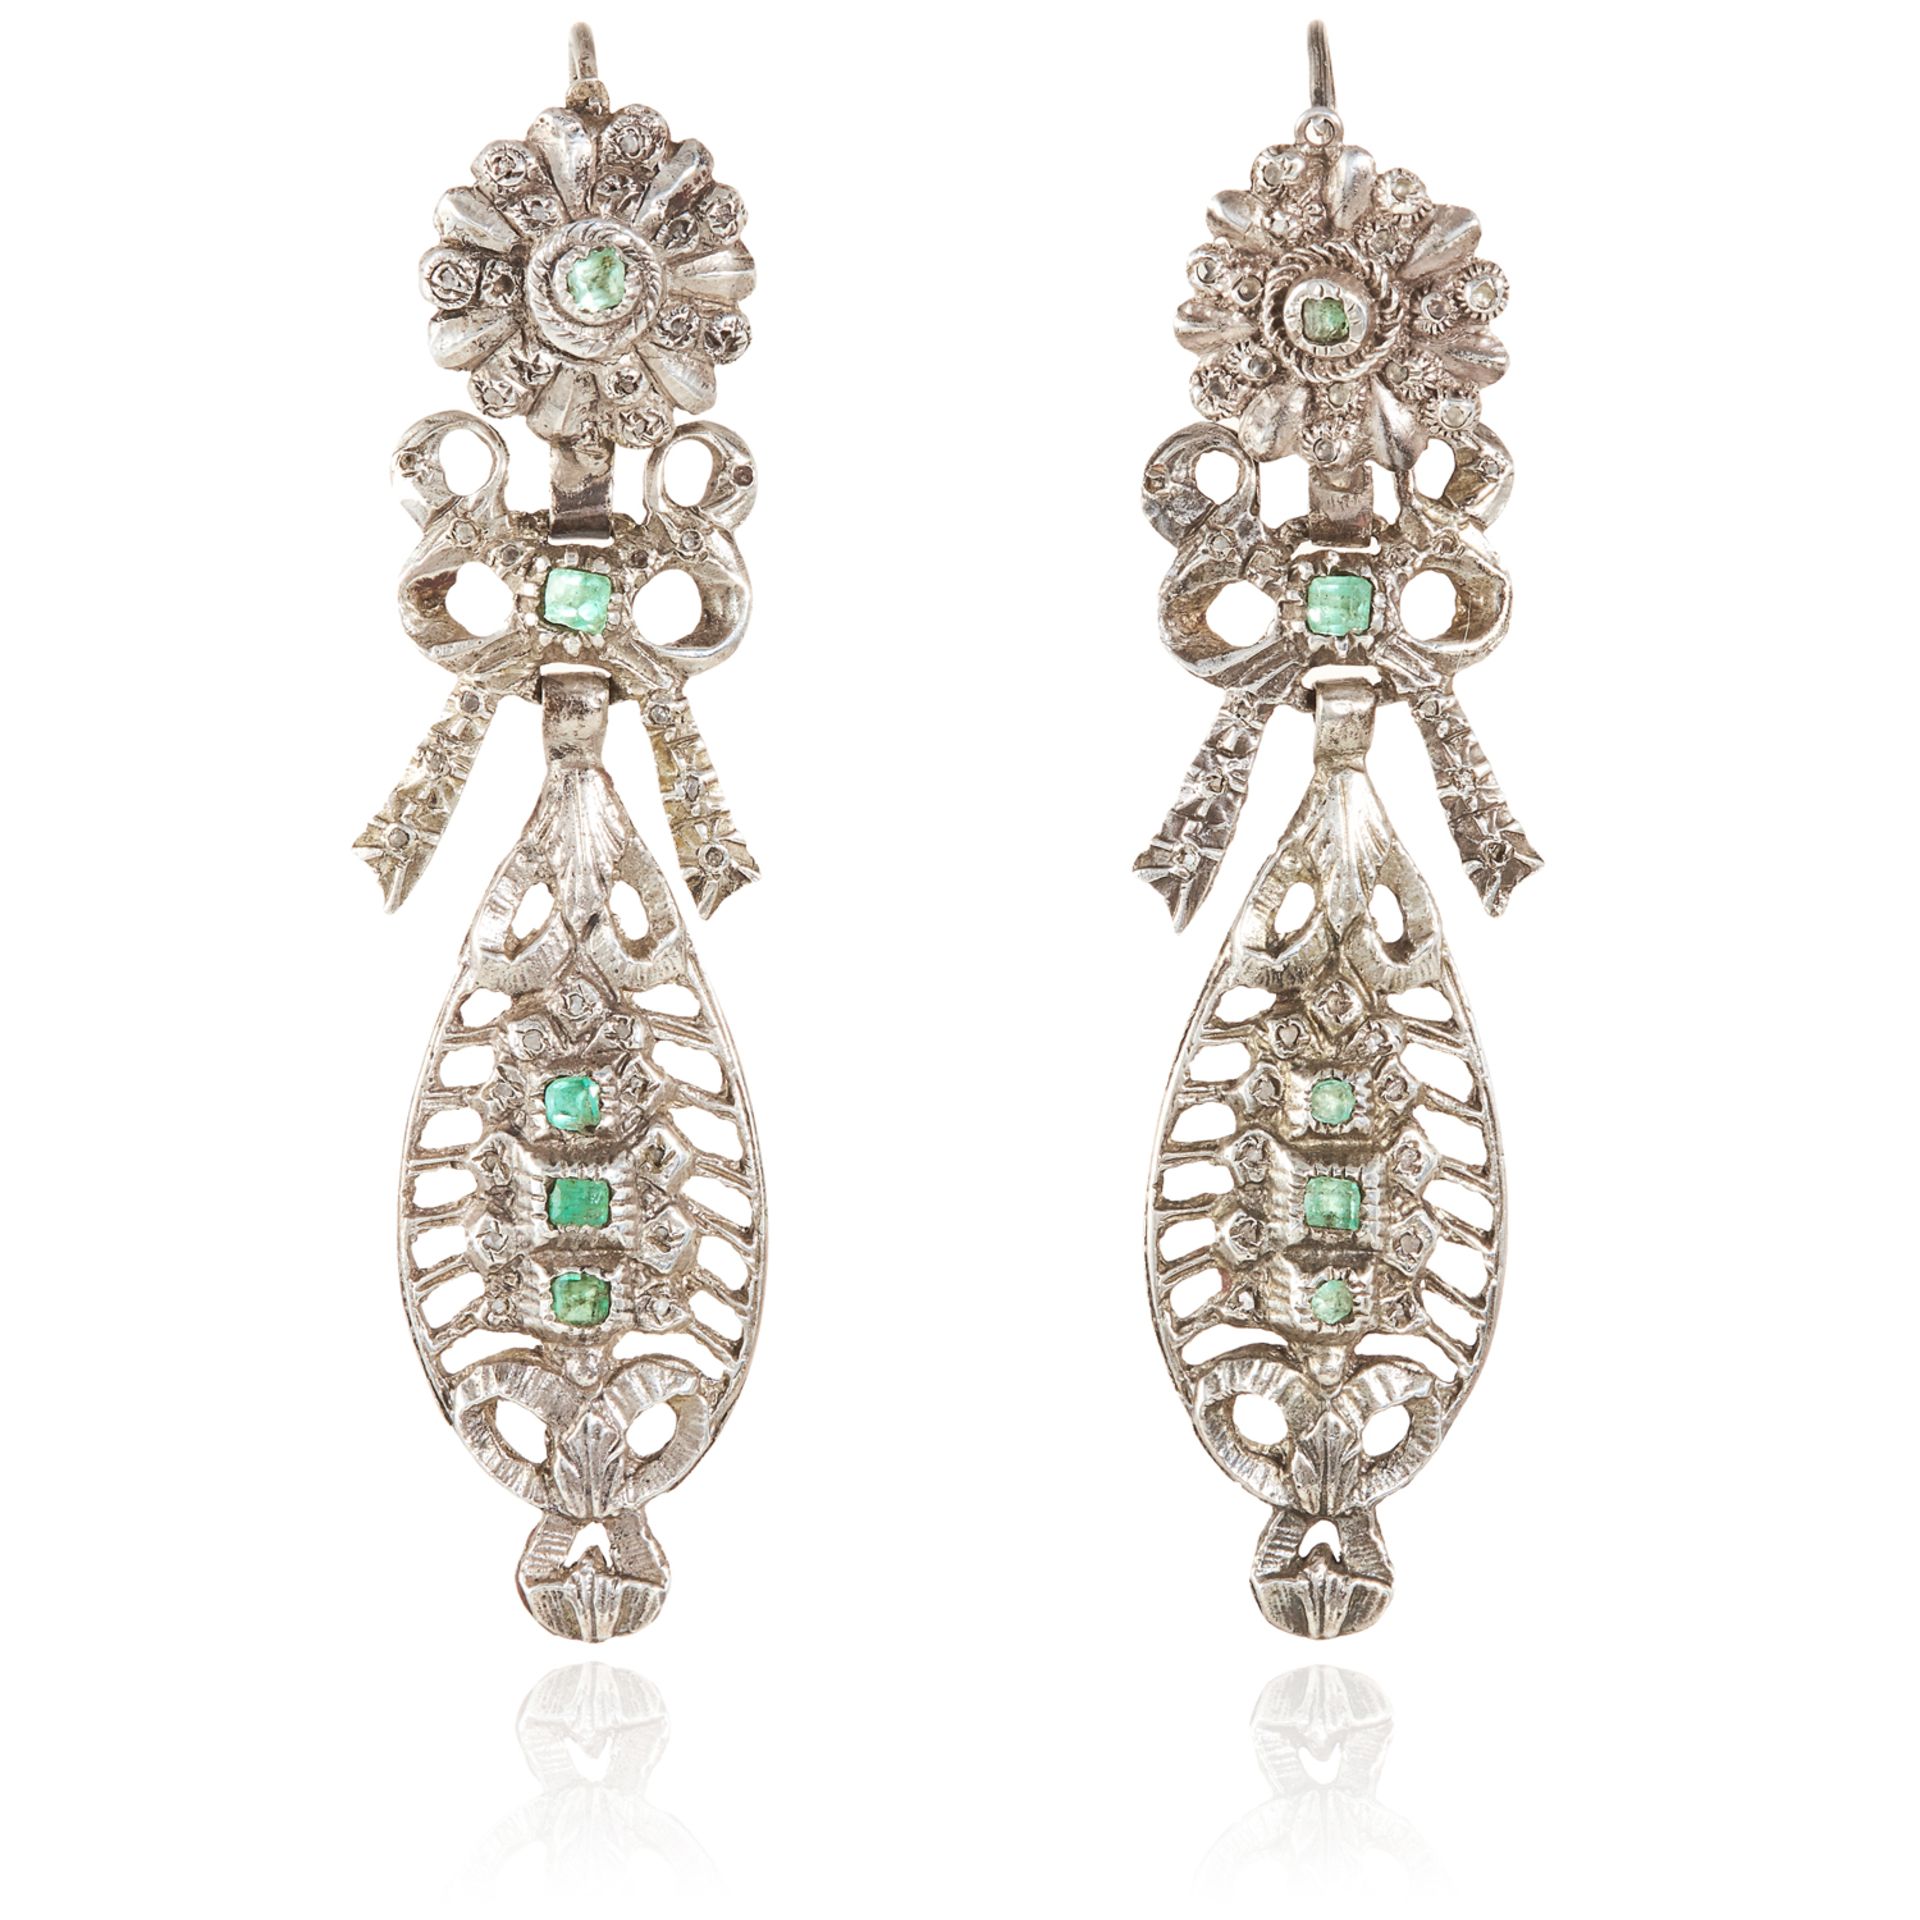 A PAIR OF SPANISH EMERALD AND DIAMOND EARRINGS, CATALAN 17TH/18TH CENTURY in silver, the articulated